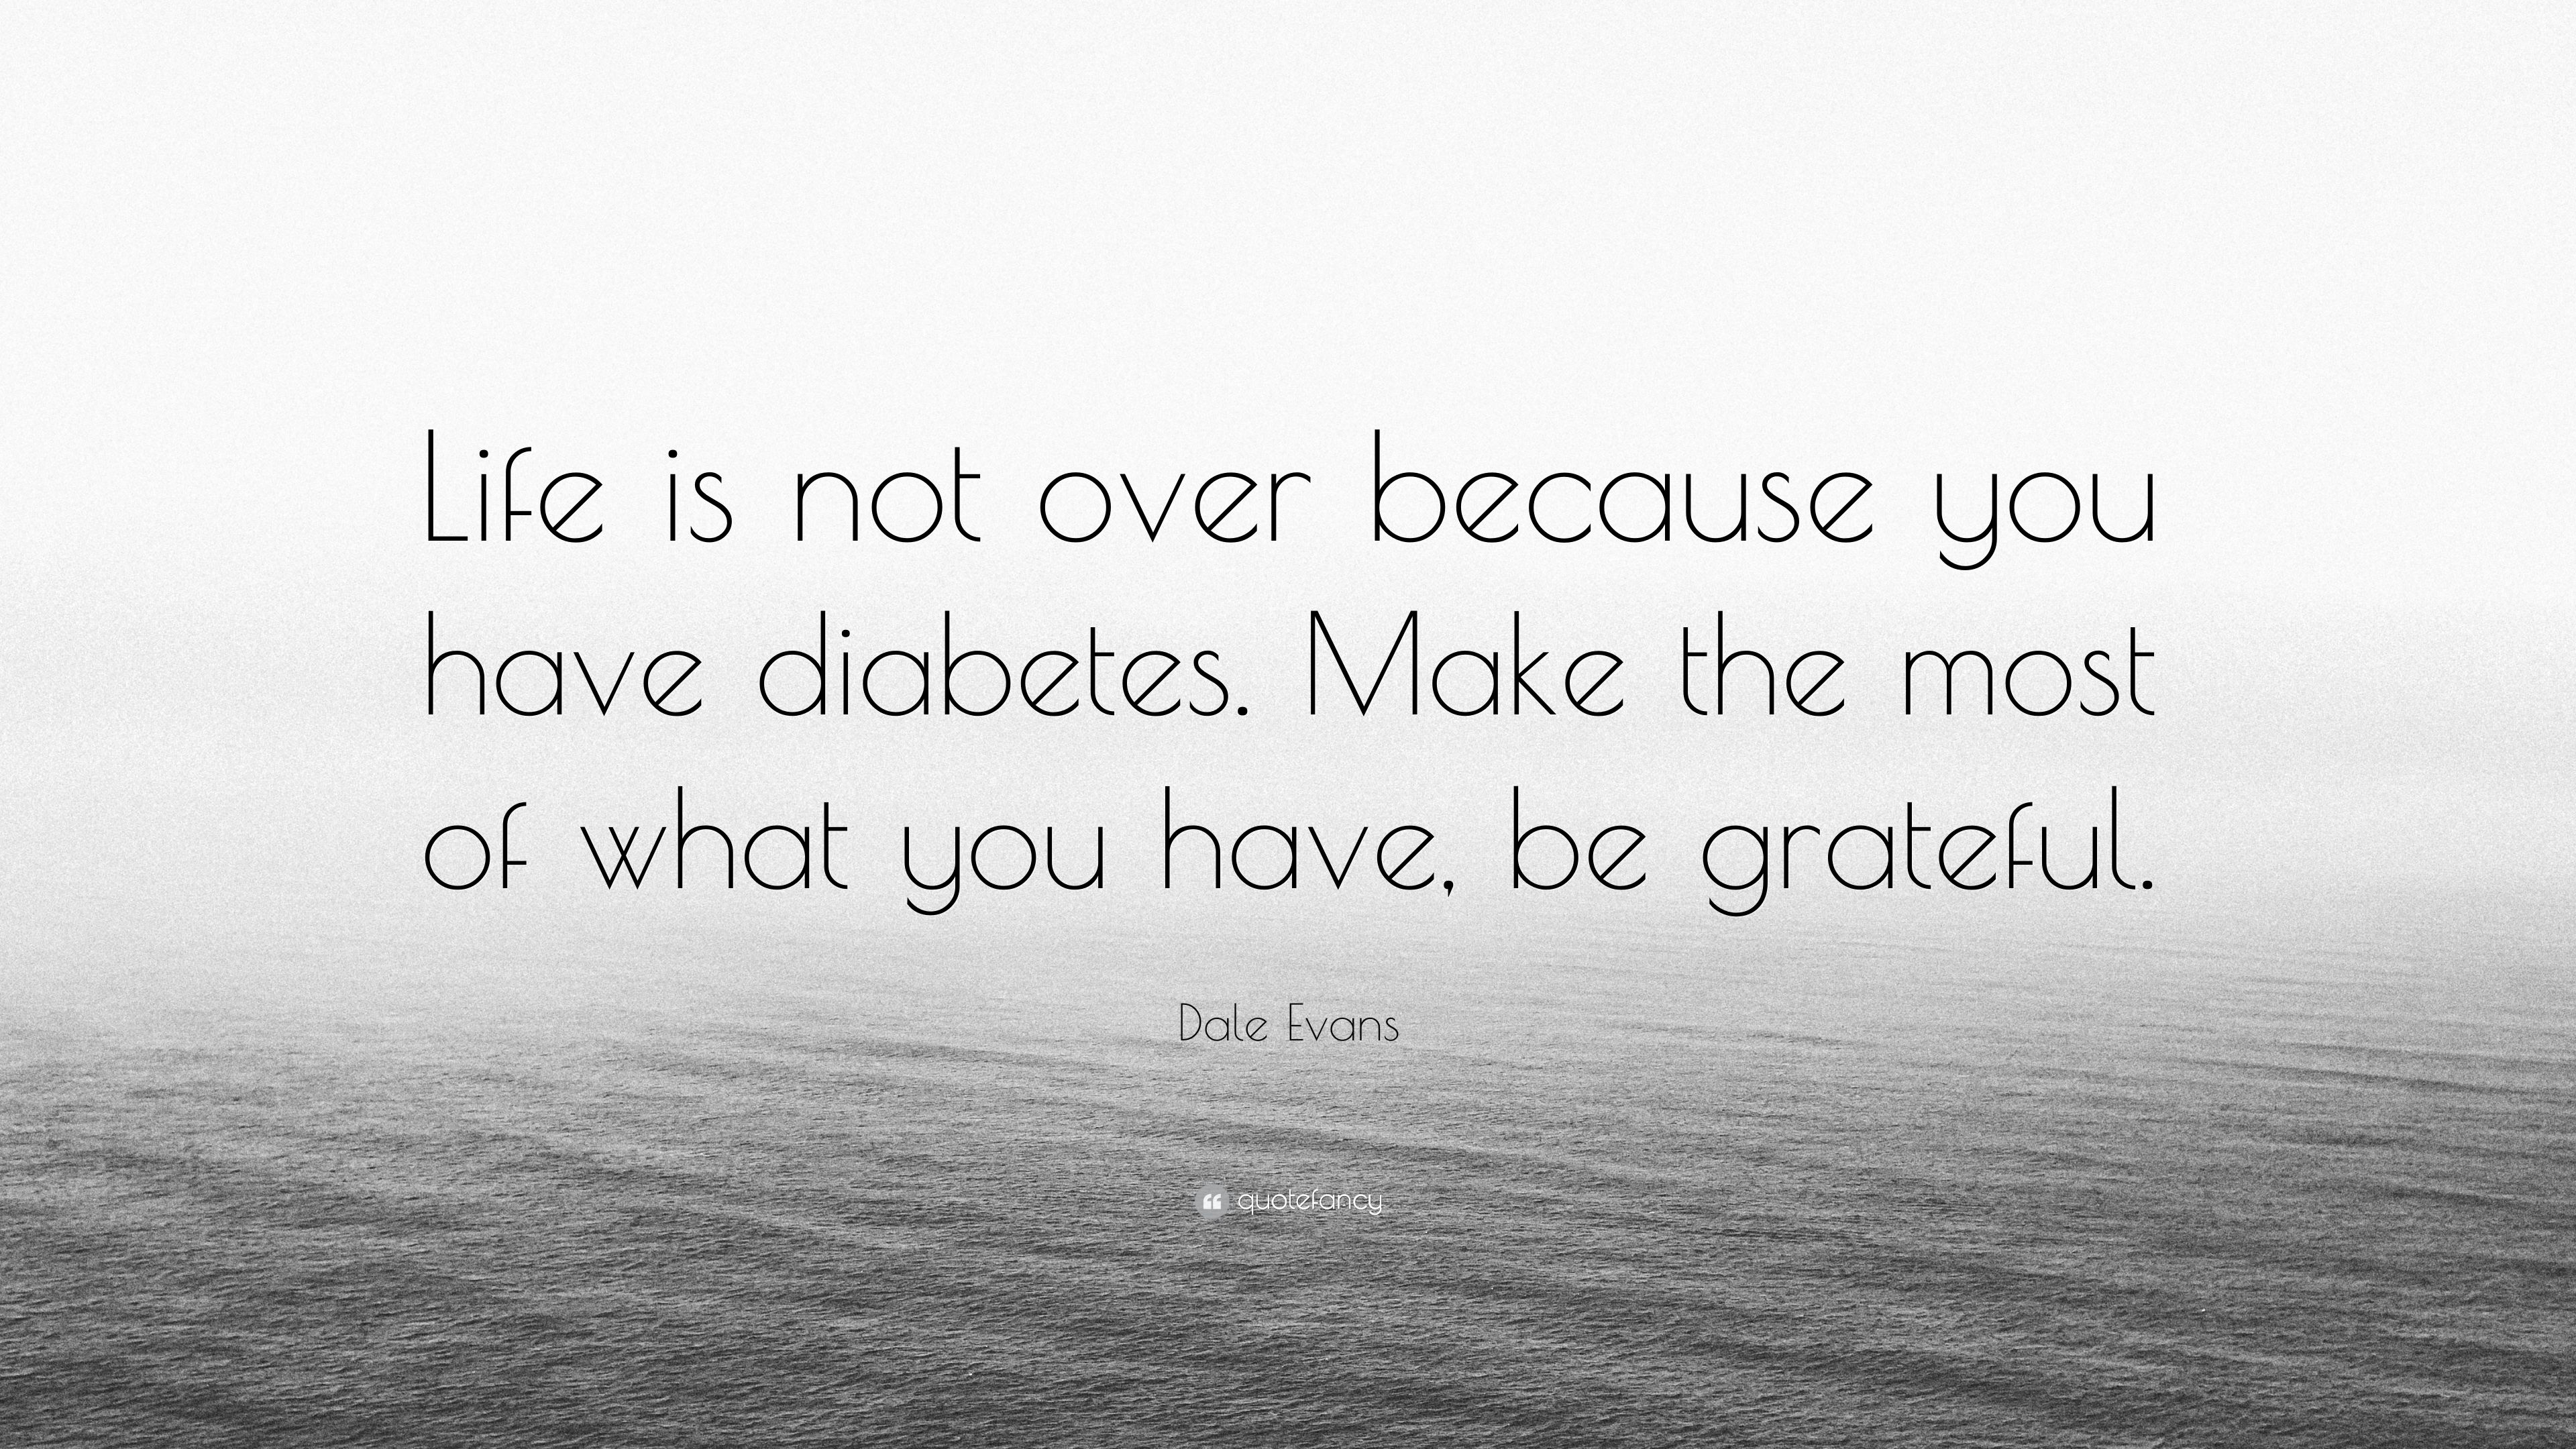 Dale Evans Quote: “Life is not over because you have diabetes. Make